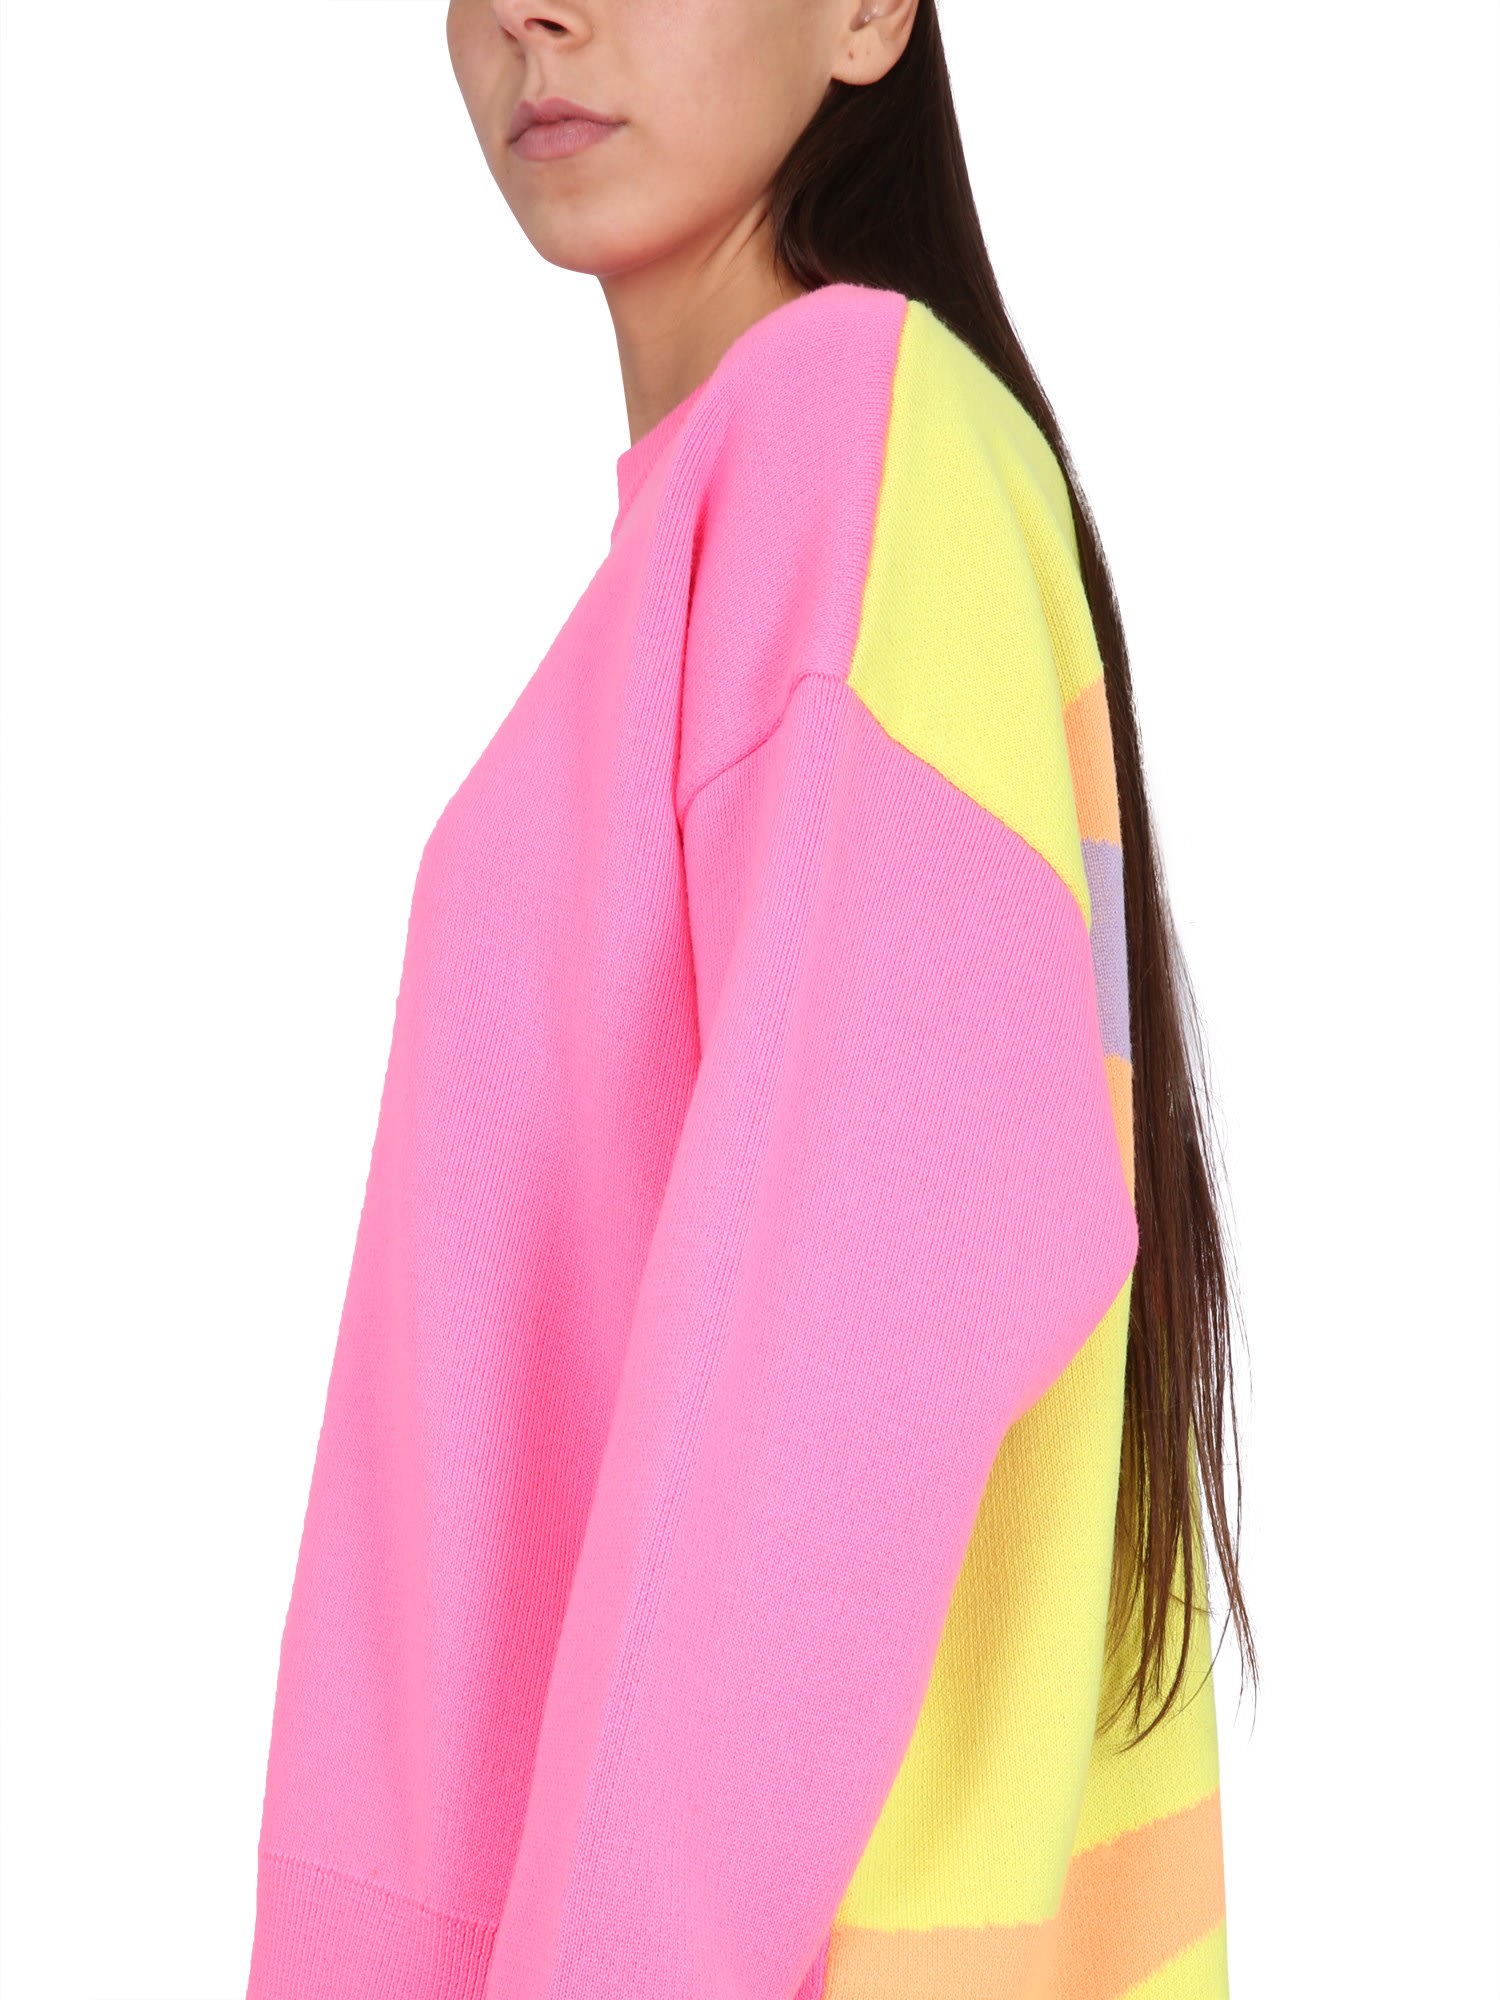 Shop Palm Angels Jersey With Palm Motif In Fucsia